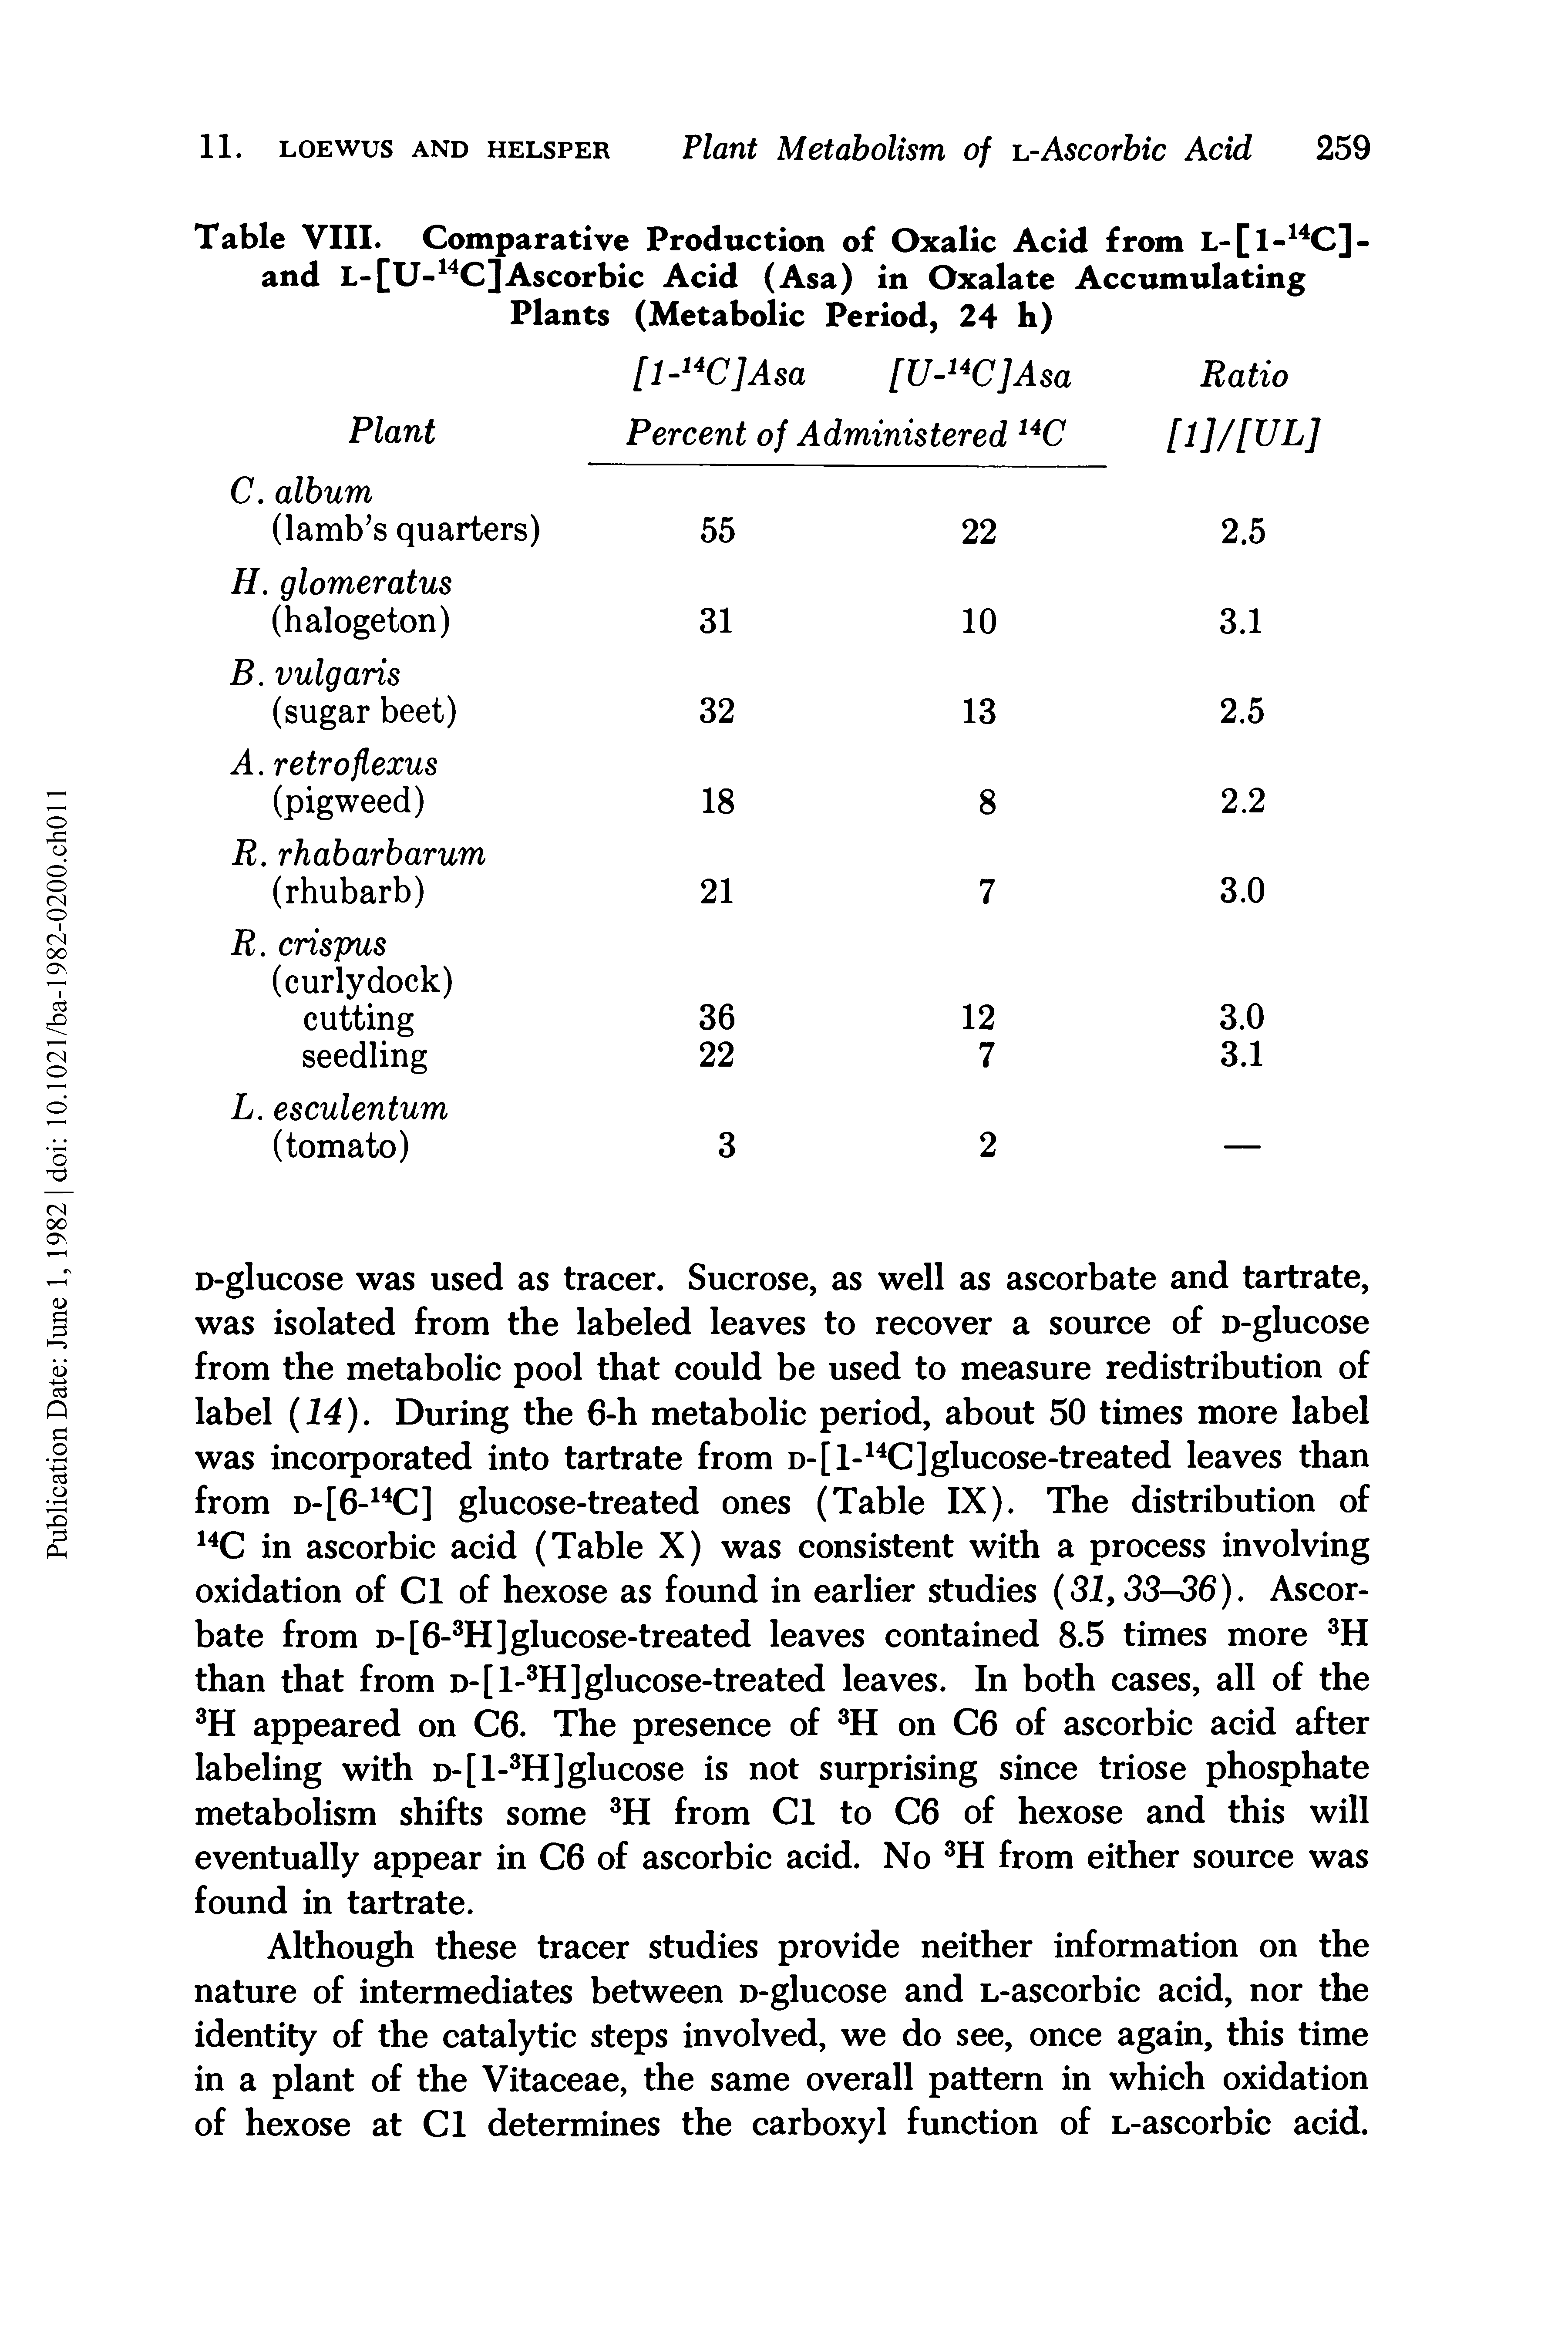 Table VIII. Comparative Production of Oxalic Acid from L-[l- C]-and L-[U- C]Ascorbic Acid (Asa) in Oxalate Accumulating Plants (Metabolic Period, 24 h)...